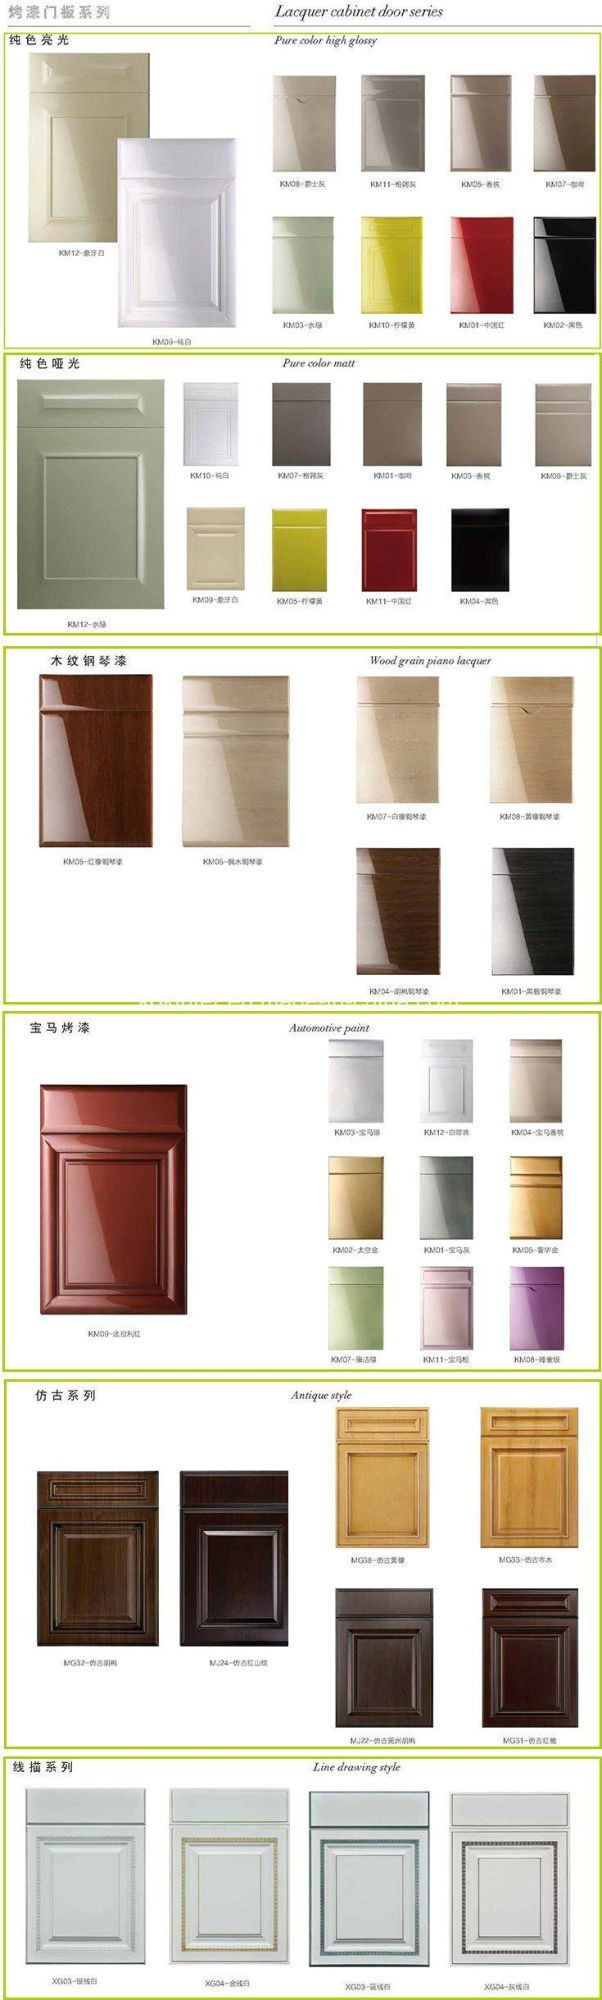 MDF/MFC/Plywood Particle Board Modern Kitchen Cabinets of Kok005